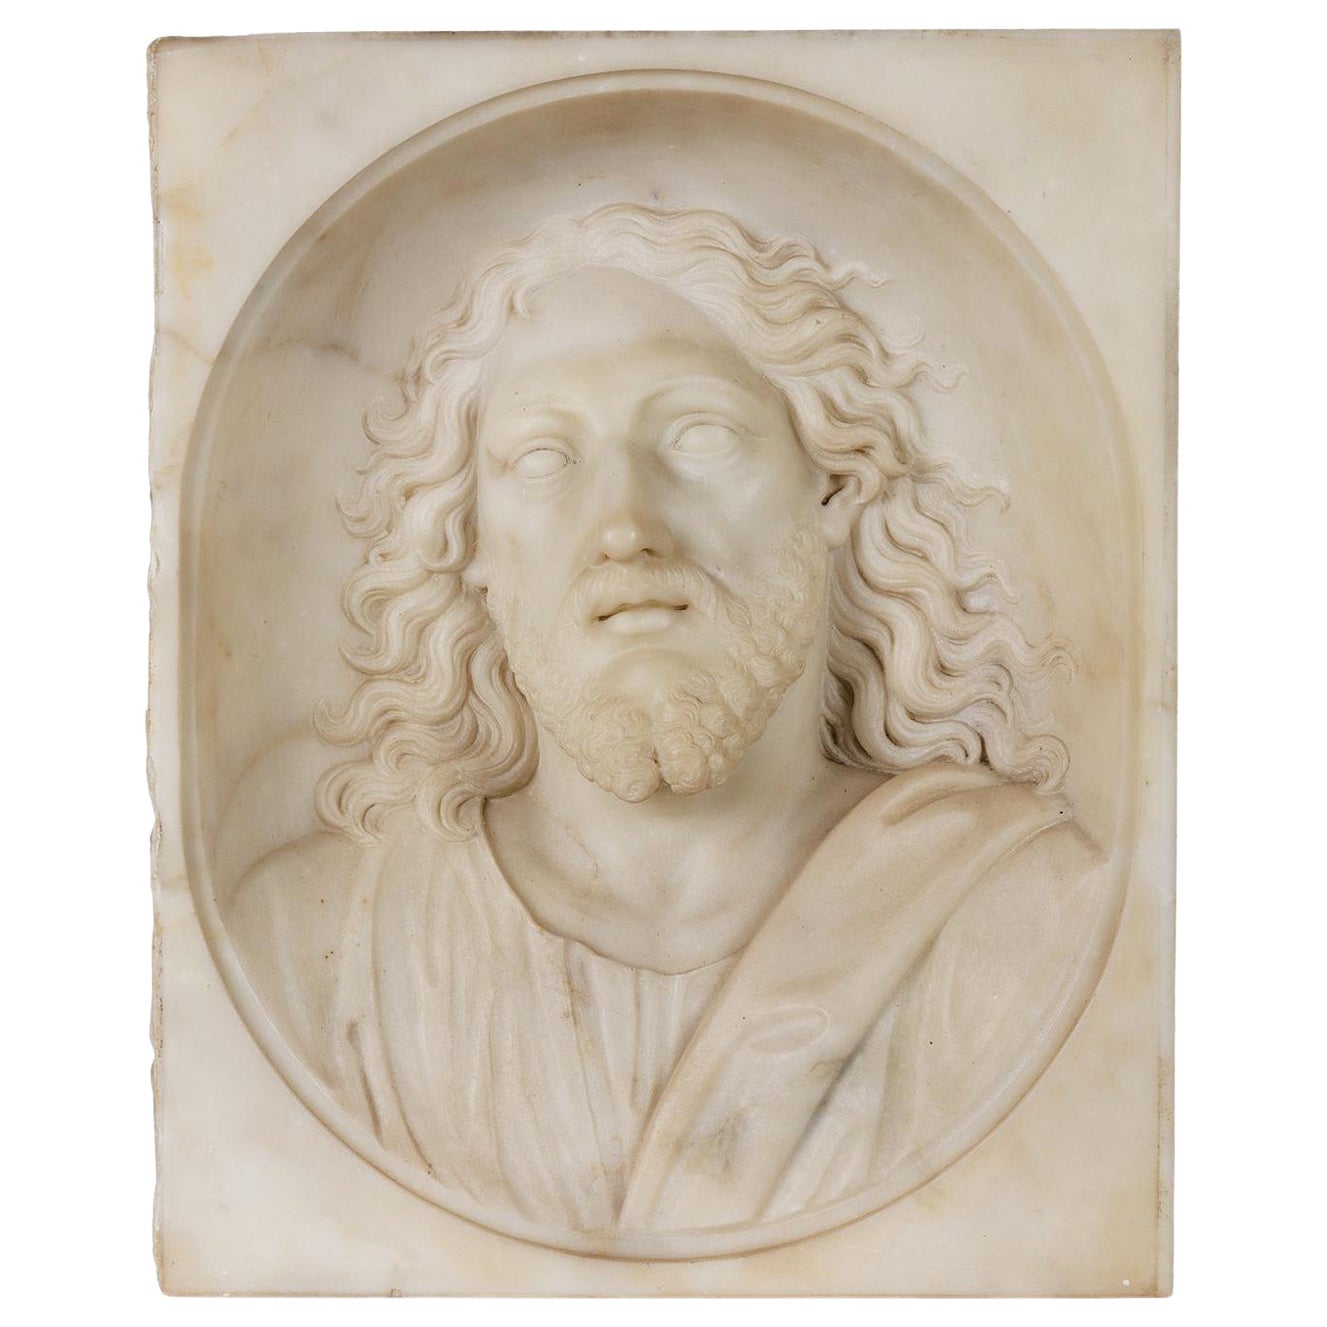 Rare and Important Italian White Marble Bust Sculpture of Jesus Christ, C. 1850 For Sale